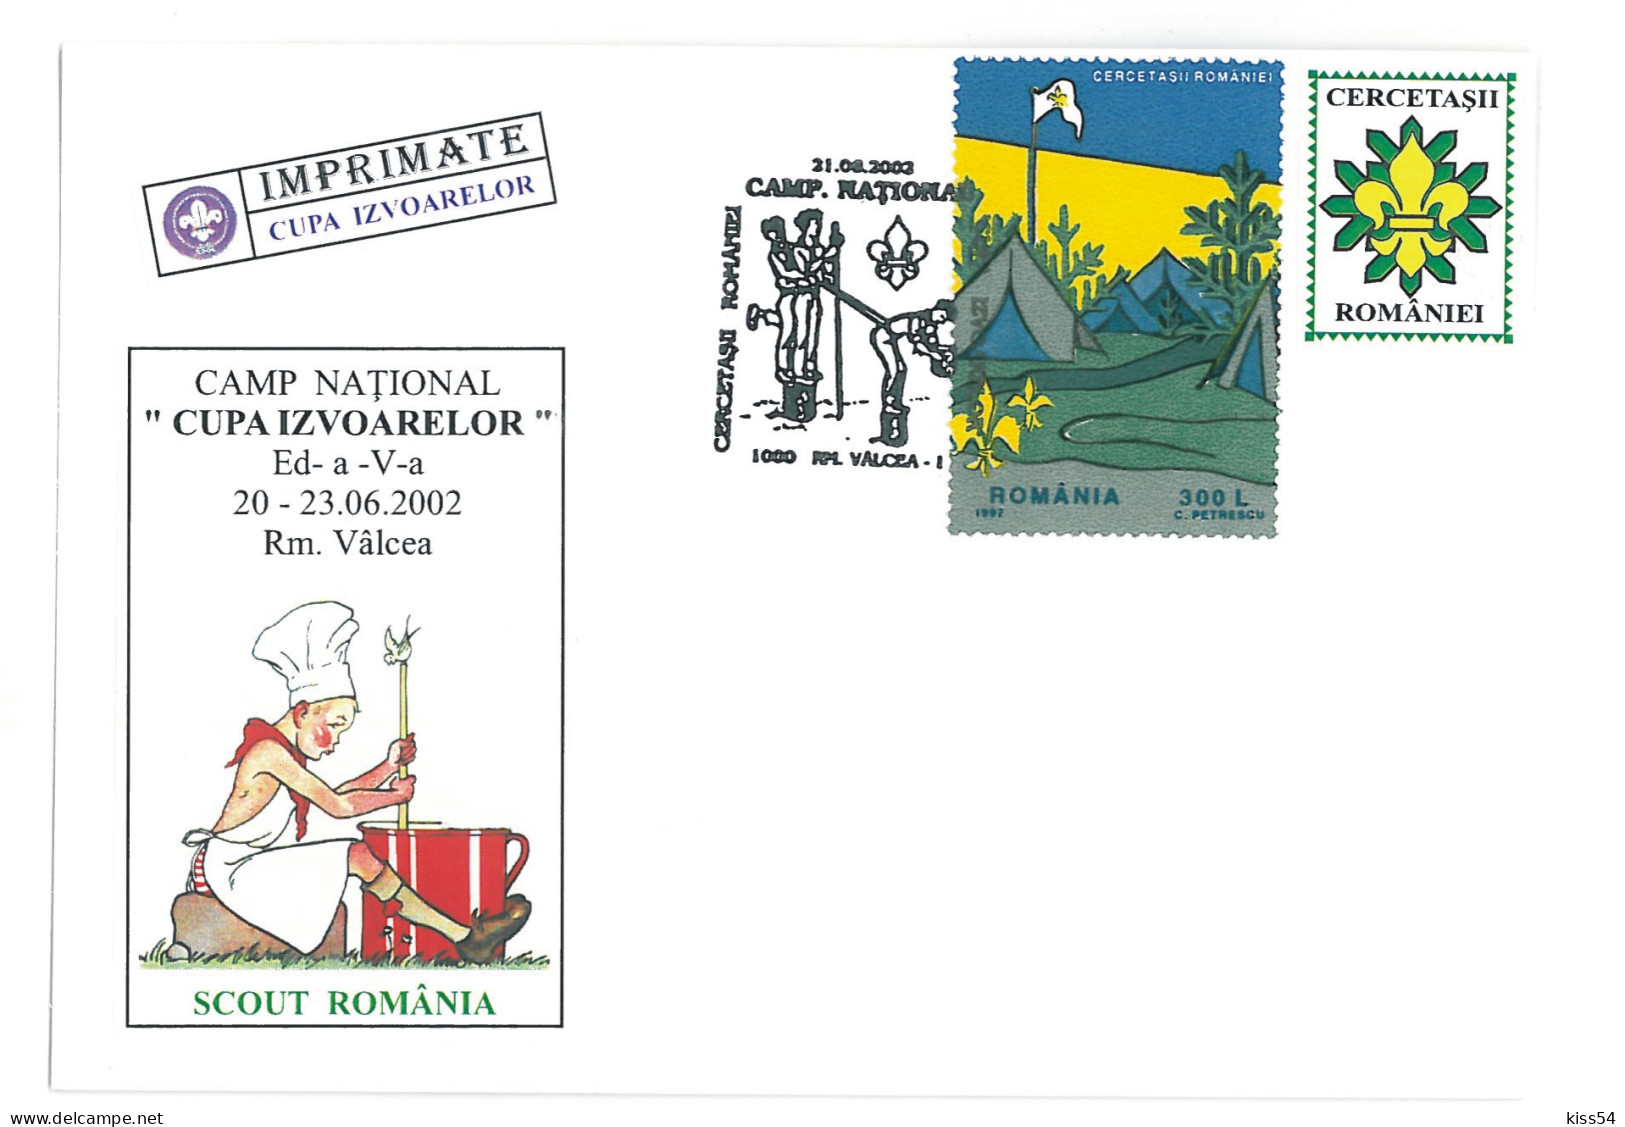 SC 54 - 1336 Scout ROMANIA, Special Stamp - Cover - Used - 2002 - Covers & Documents